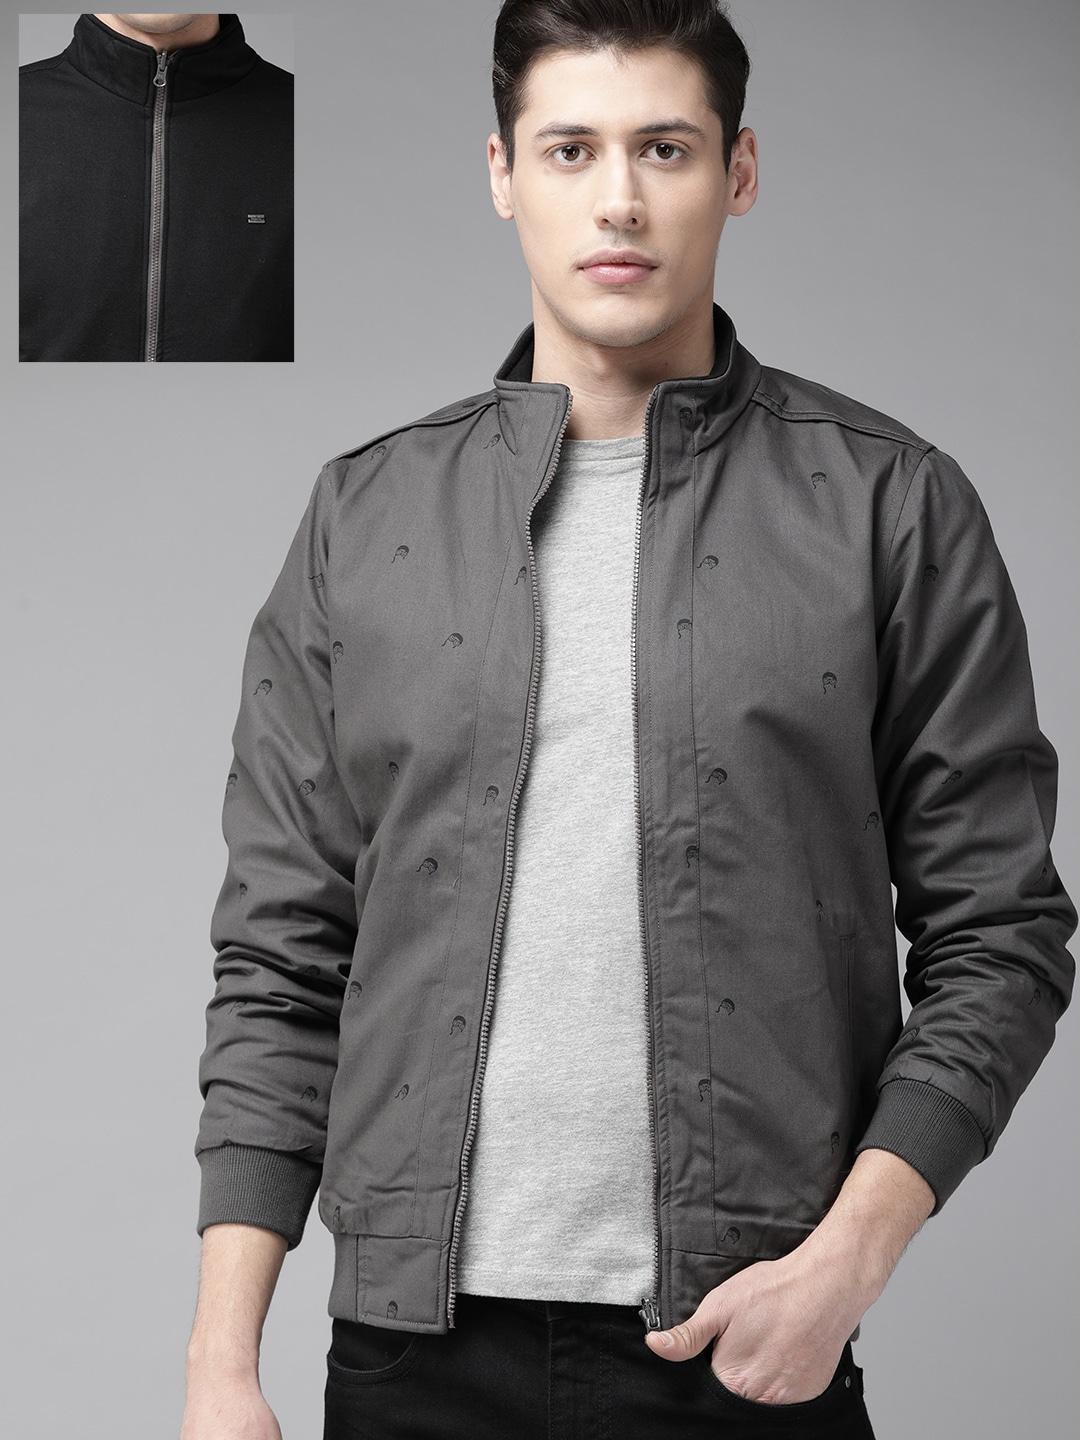 The Roadster Lifestyle Co Men Charcoal Grey & Black Printed Reversible Bomber Jacket